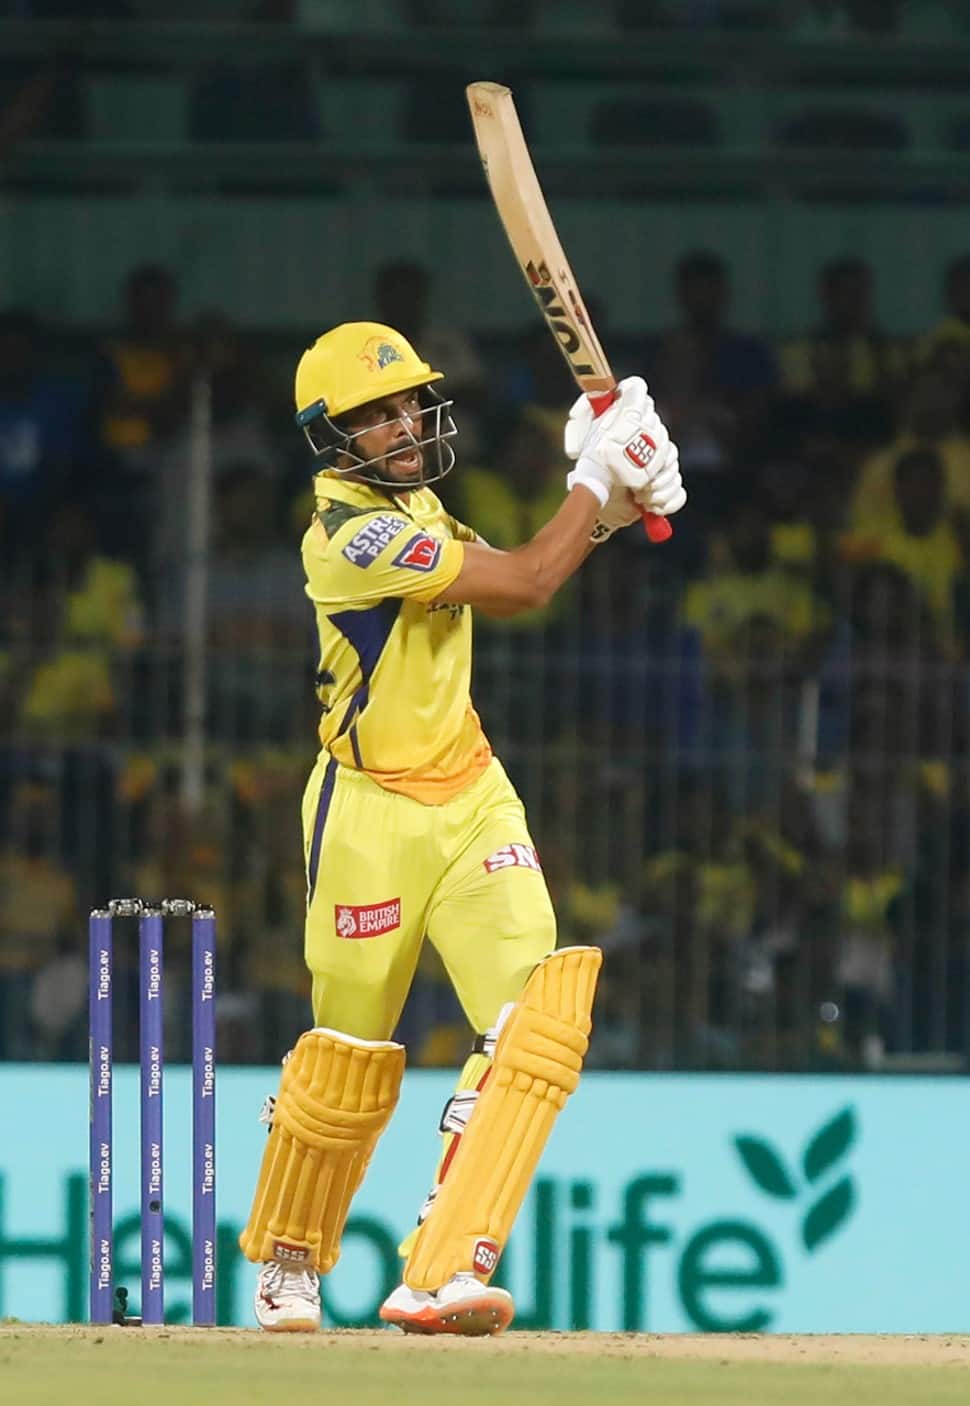 Chennai Super Kings opener Ruturaj Gaikwad is set to open the innings for India in the three-match T20I series against Ireland beginning in Malahide on Friday. Gaikwad scored 590 runs in 16 matches in IPL 2023. 